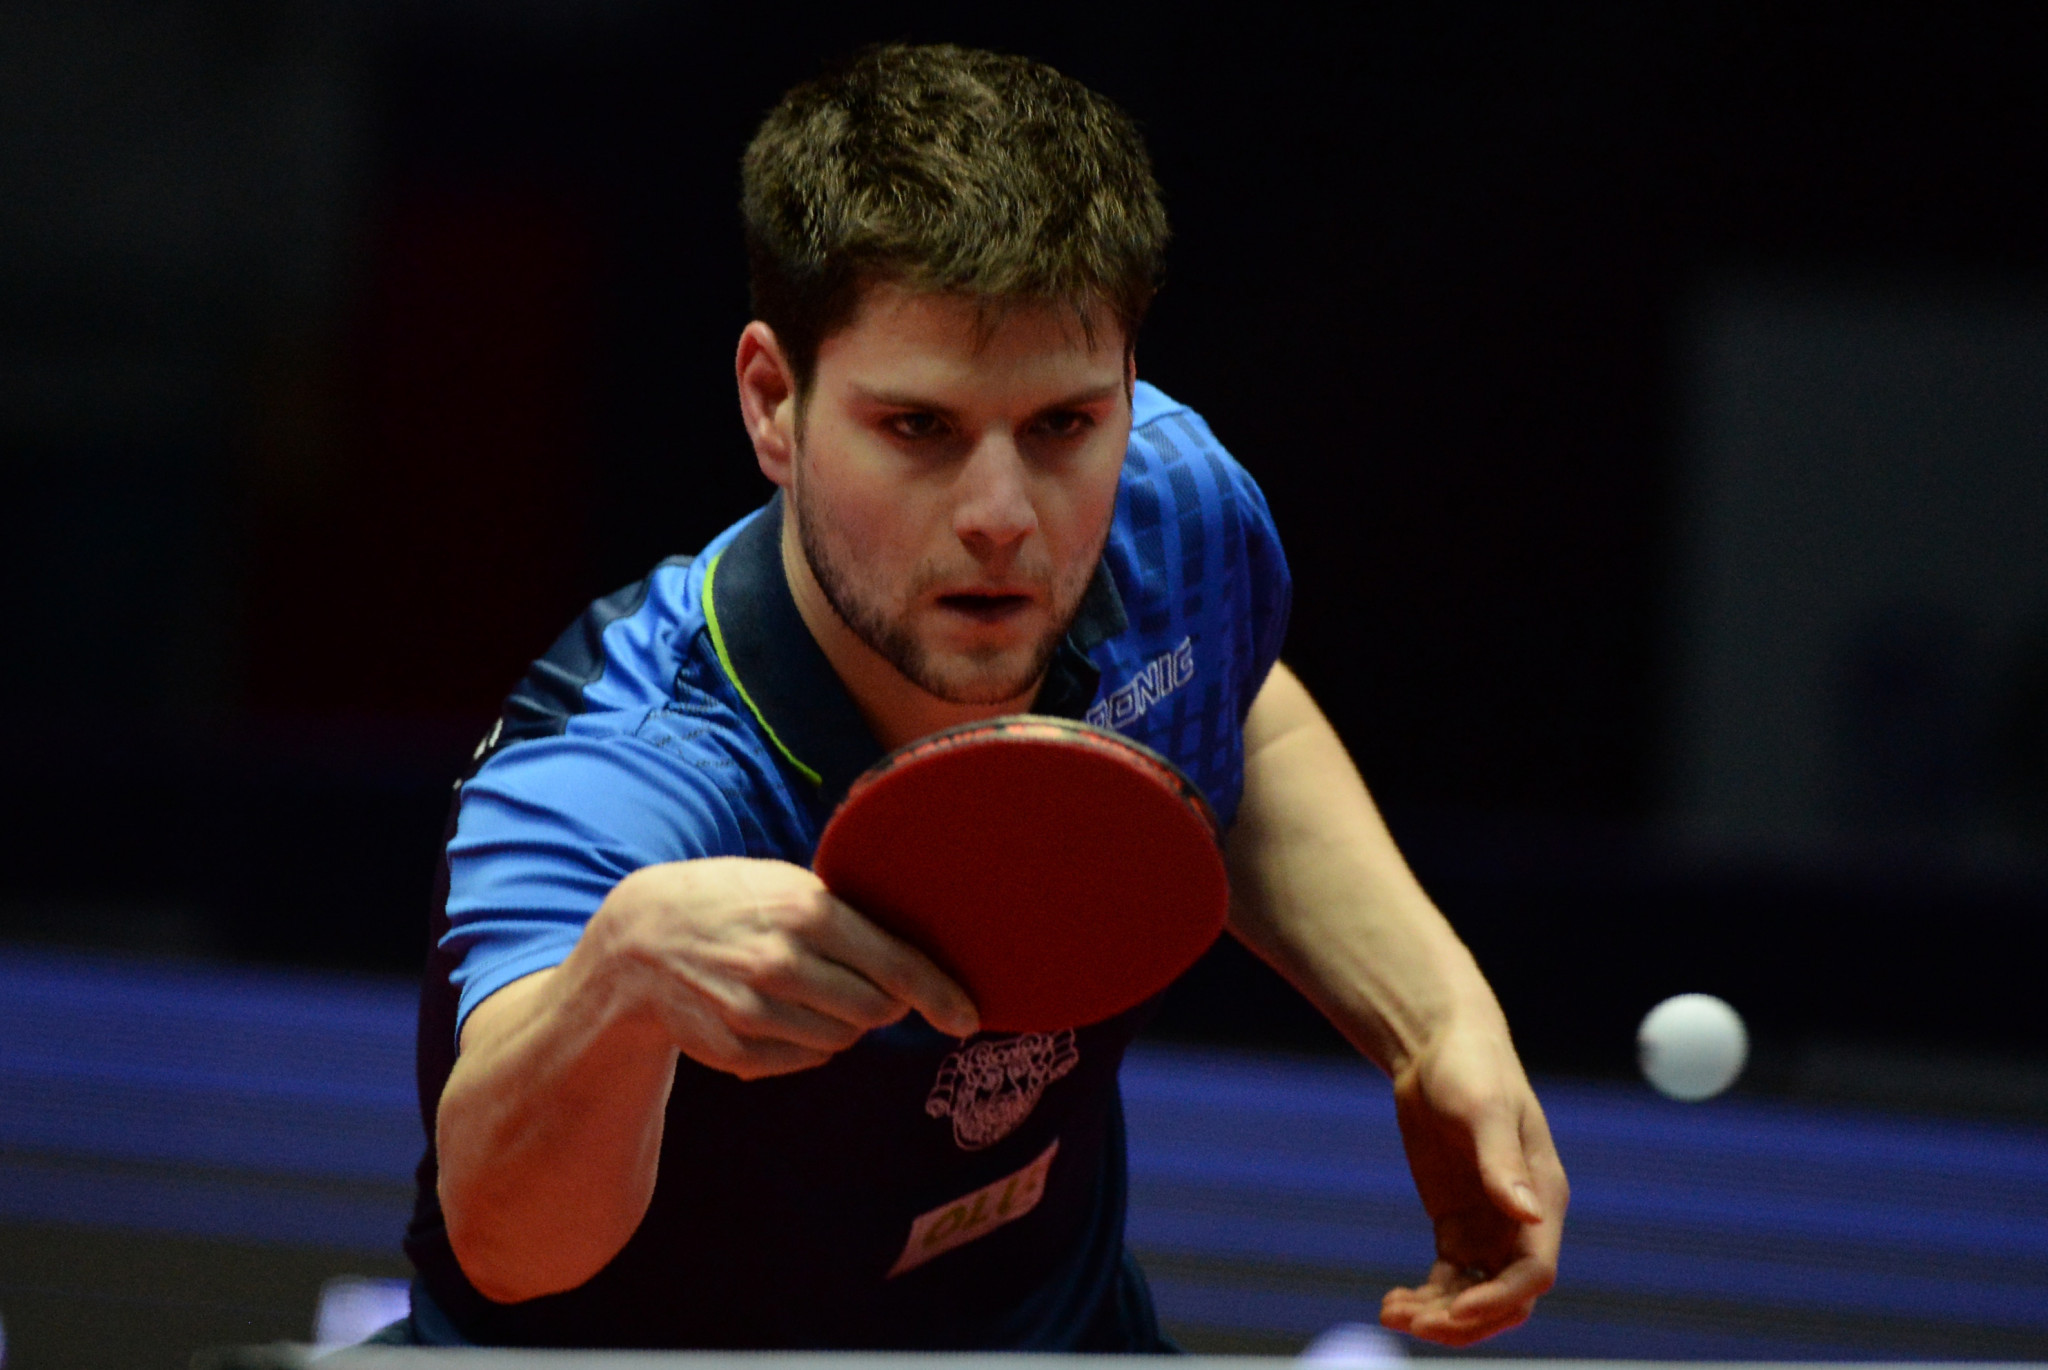 Major table tennis events are included as part of the deal ©Getty Images